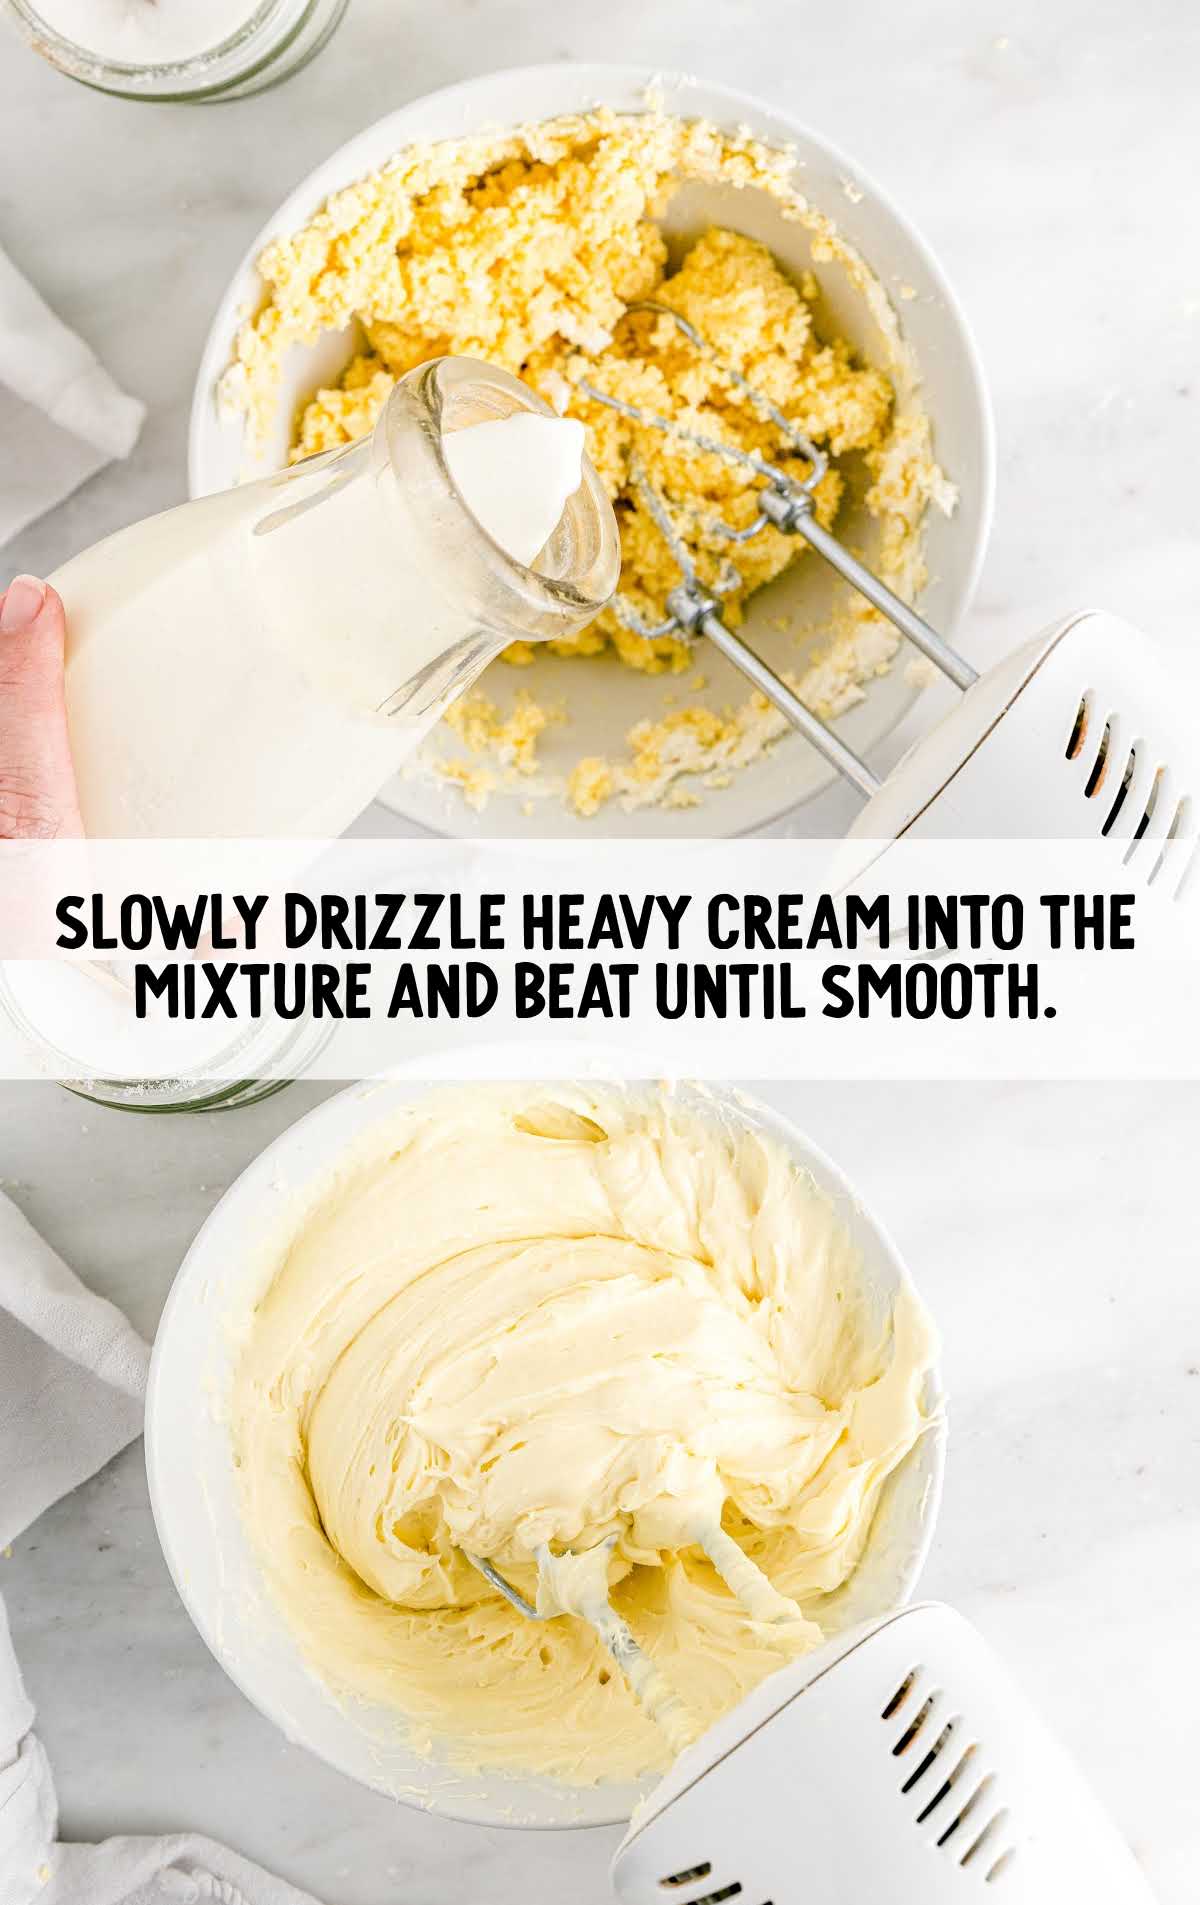 heavy cream drizzled into the cream cheese mixture and blended together in a bowl